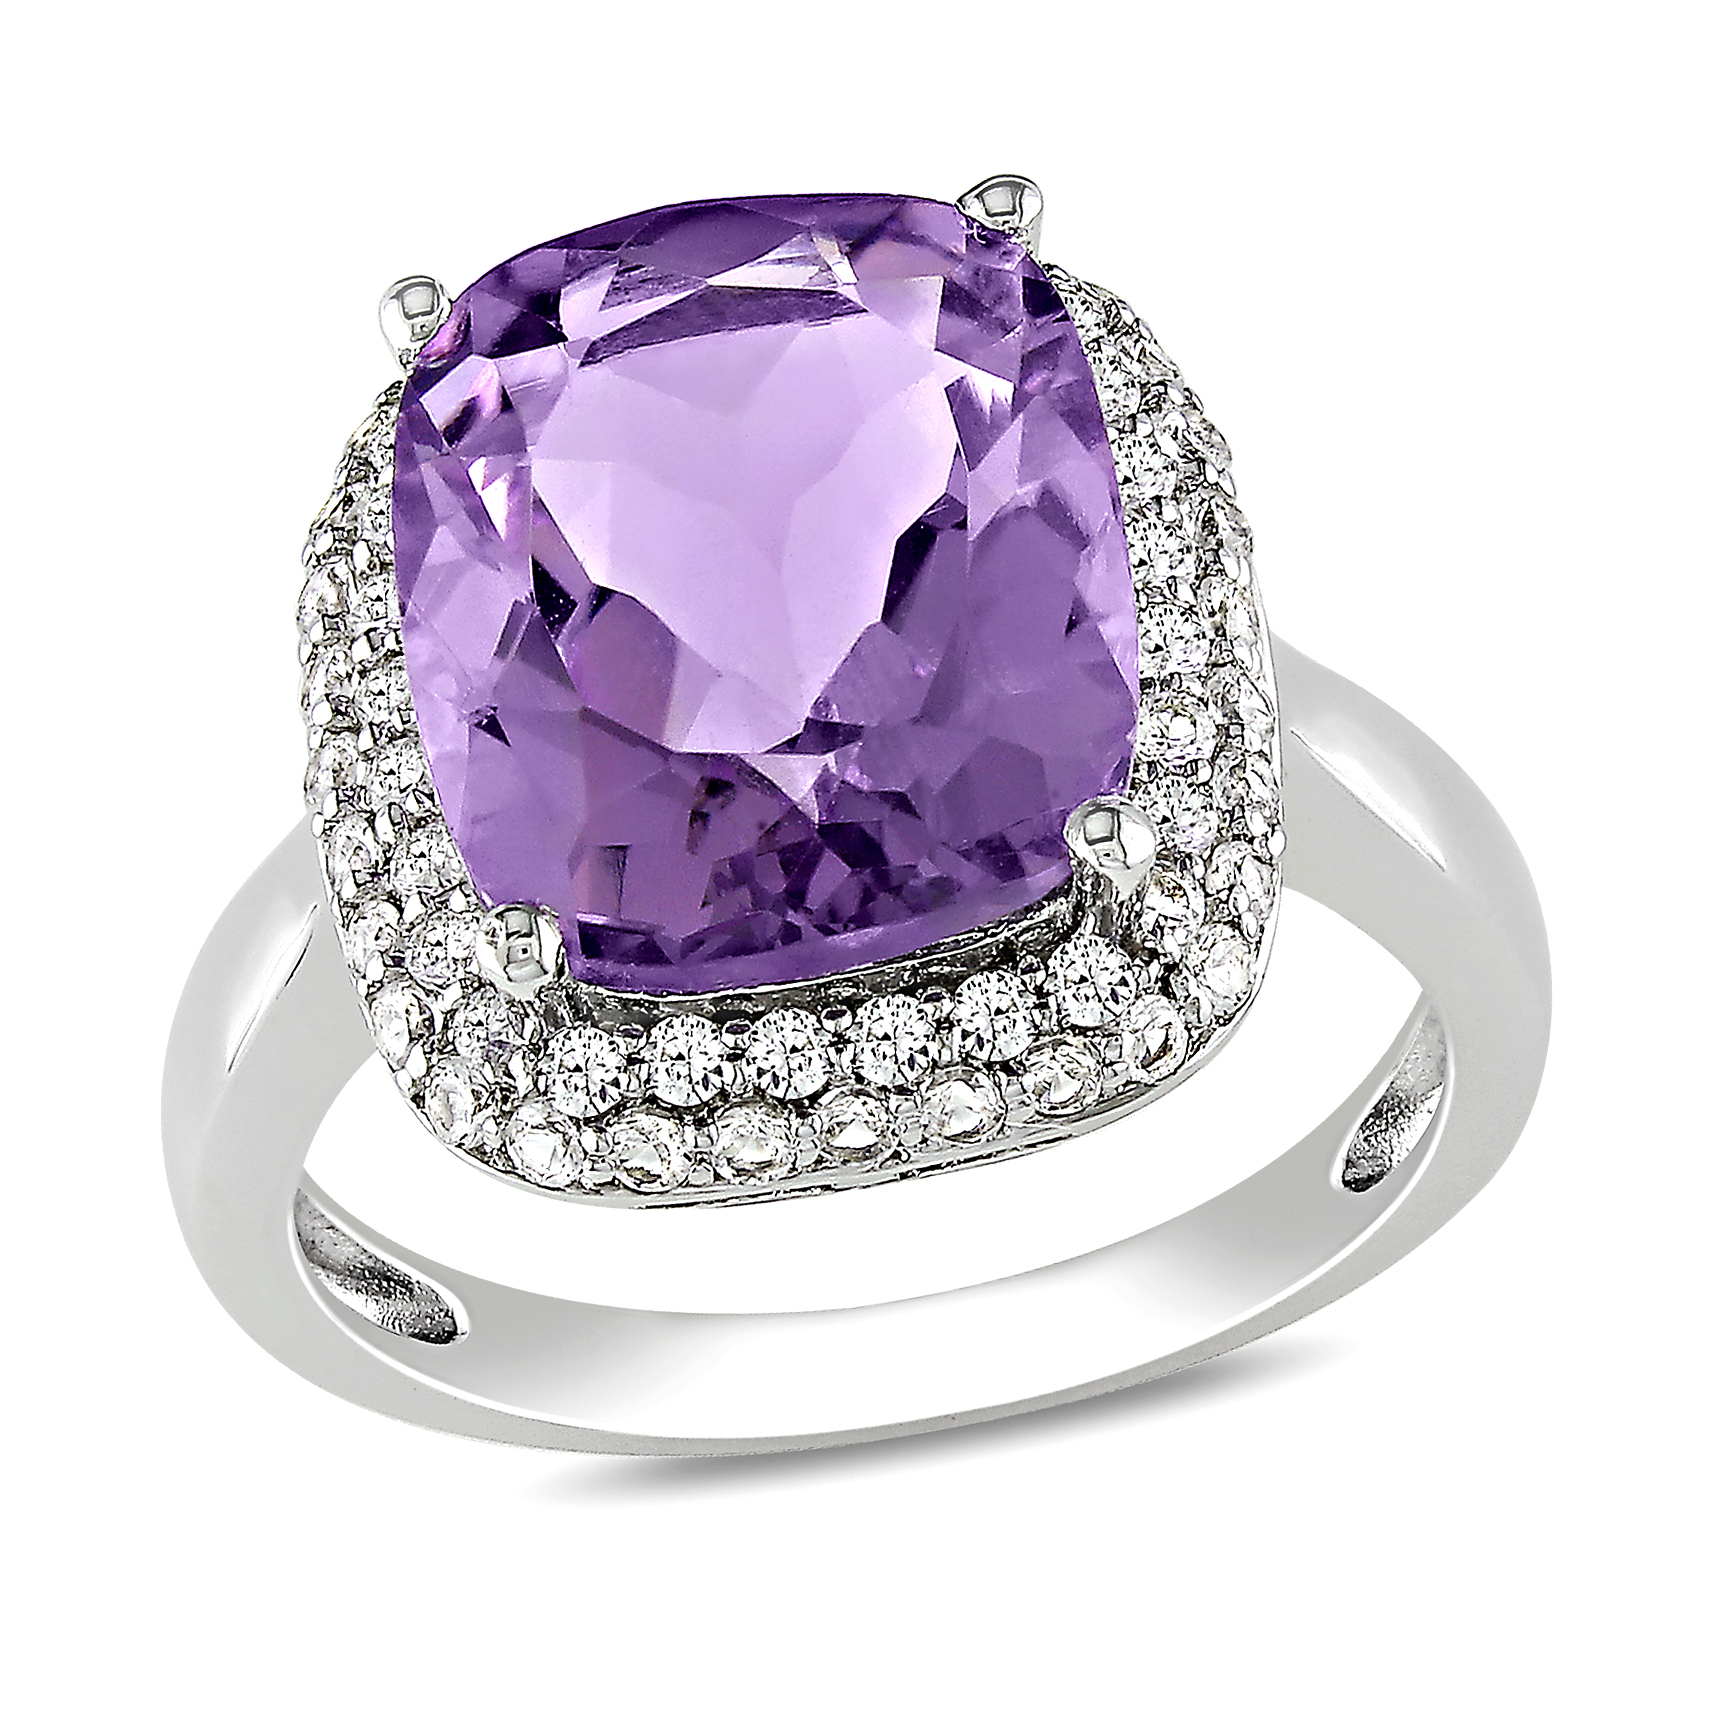 5.6 Carat T.G.W. Amethyst Created White Sapphire Fashion Ring in Sterling Silver